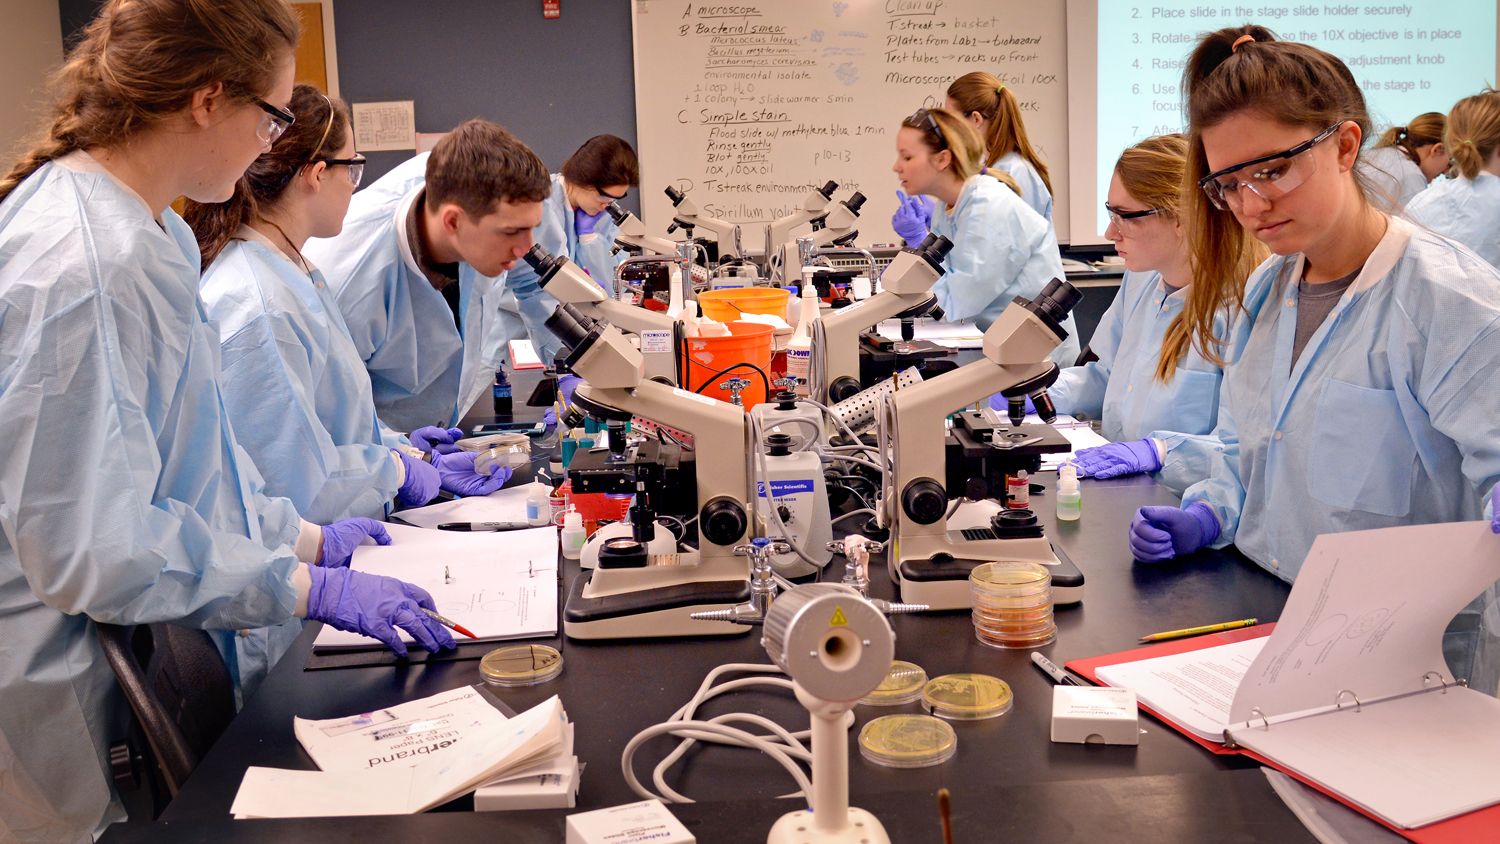 Students in a laboratory.